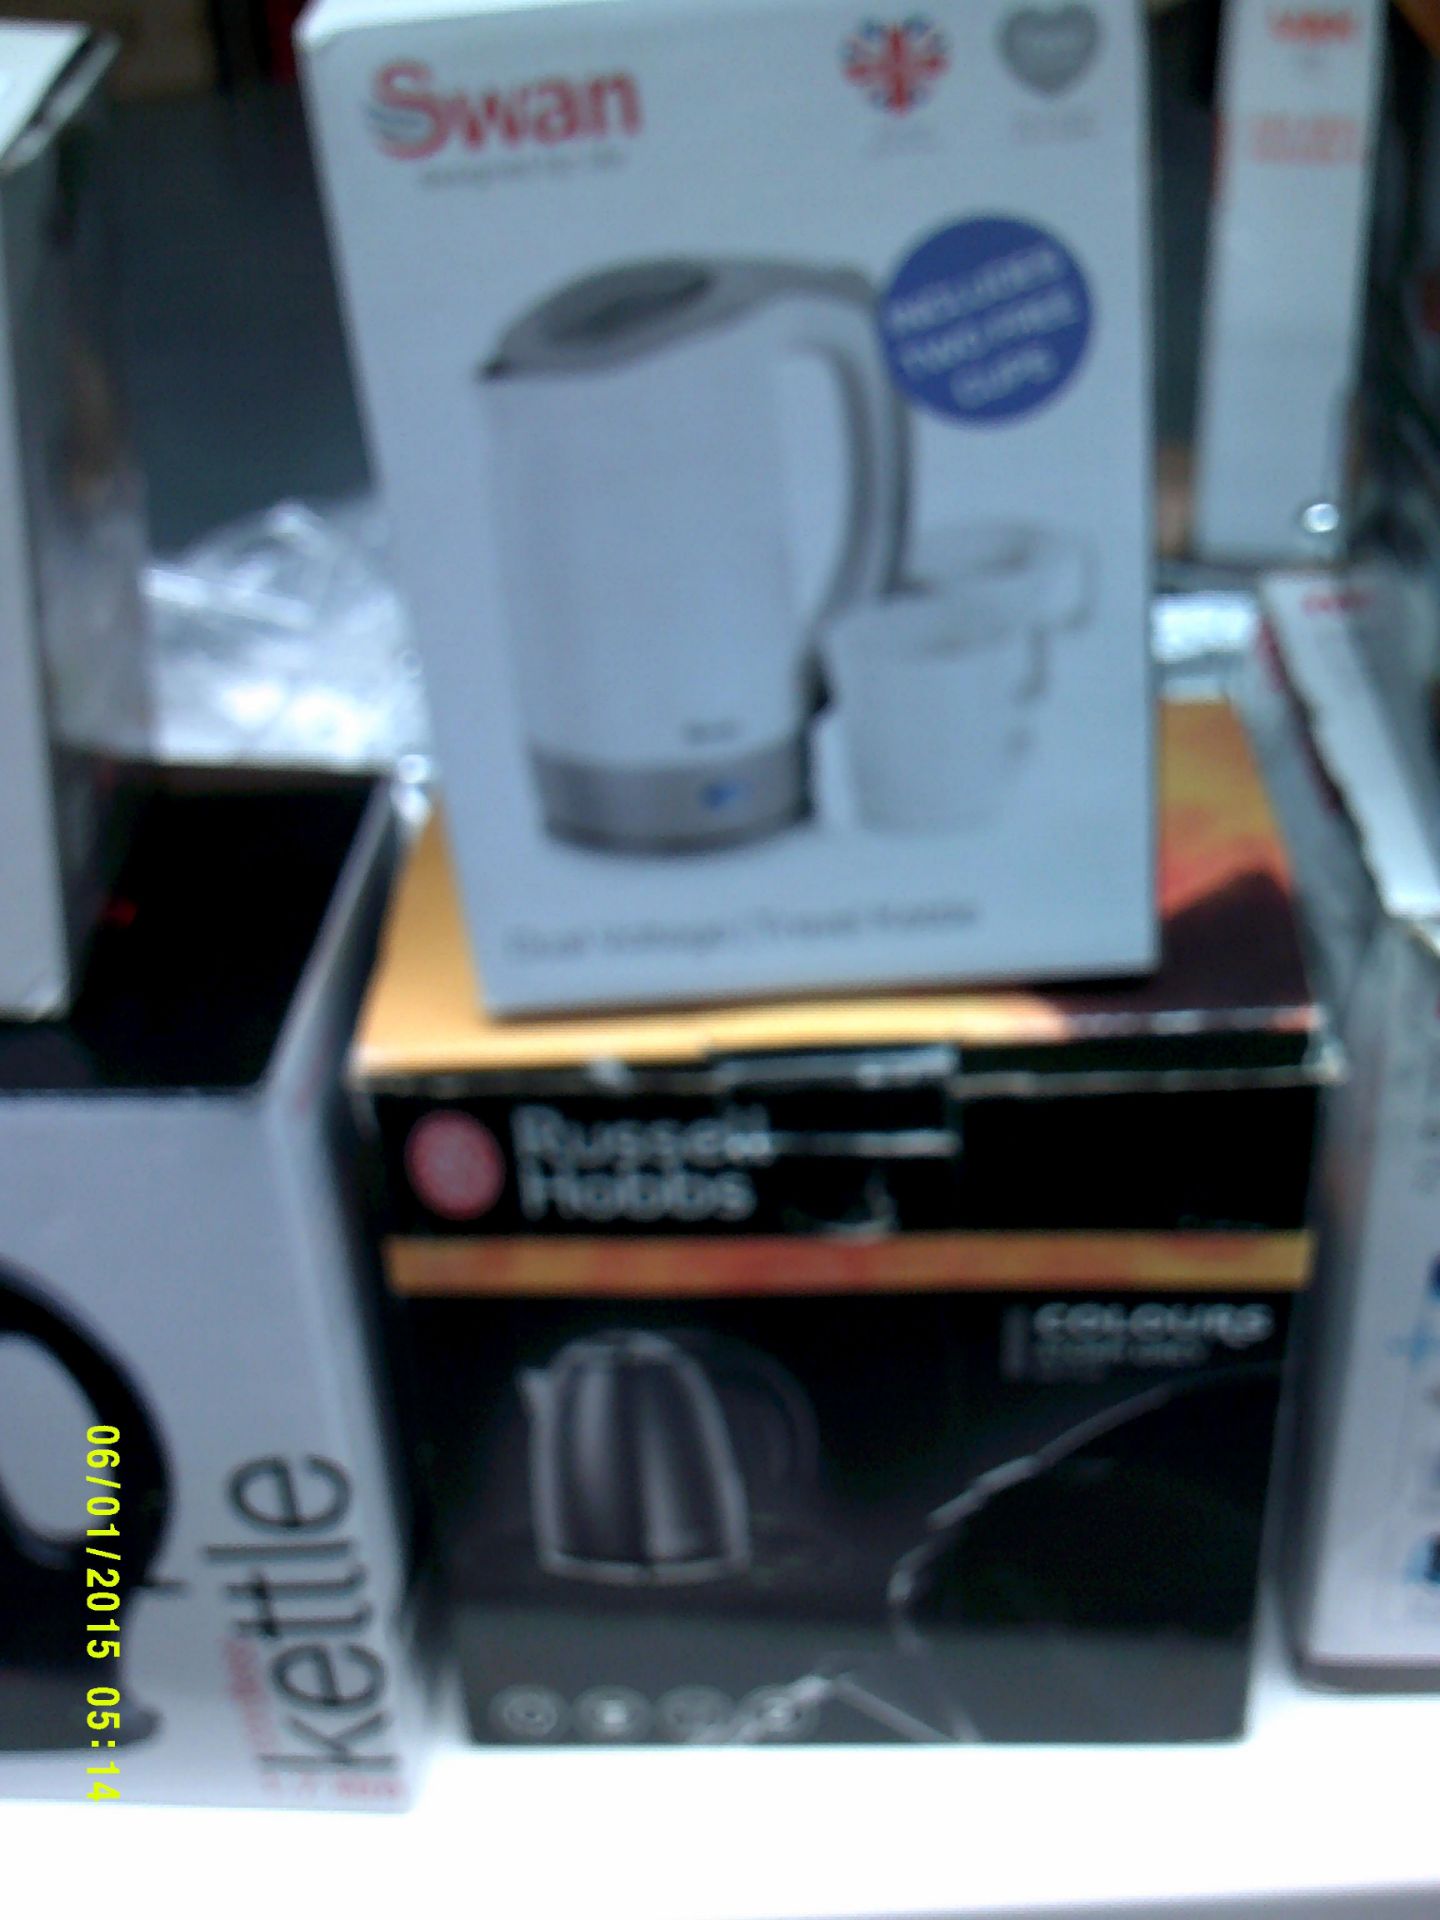 Swan Dual Voltage Travel Kettle with 2 Cups and Russel Hobbs Storm Grey Kettle Customer Returns